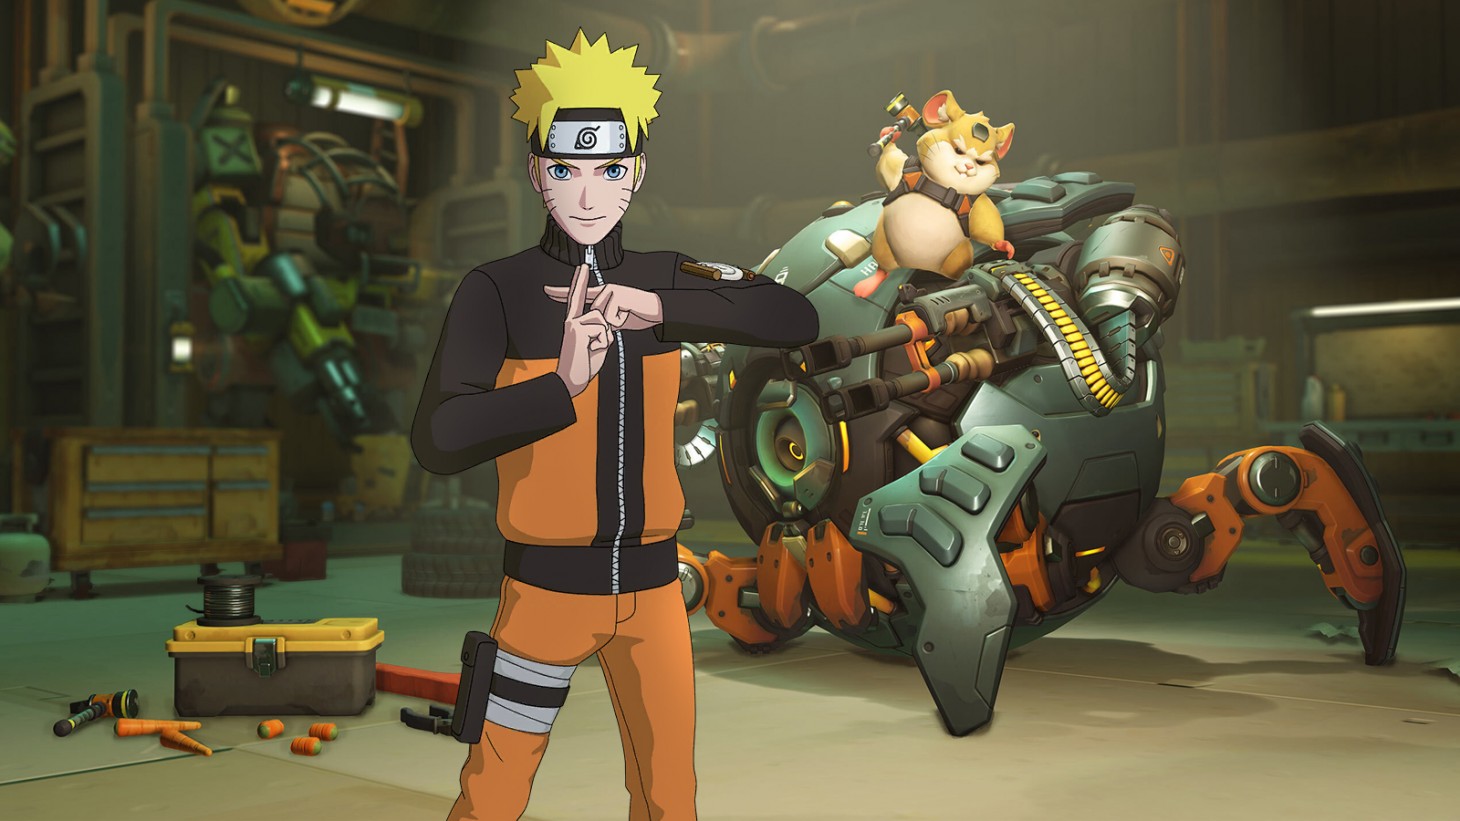 New Naruto Game Will Let Xbox Series X Players Block Users on Xbox